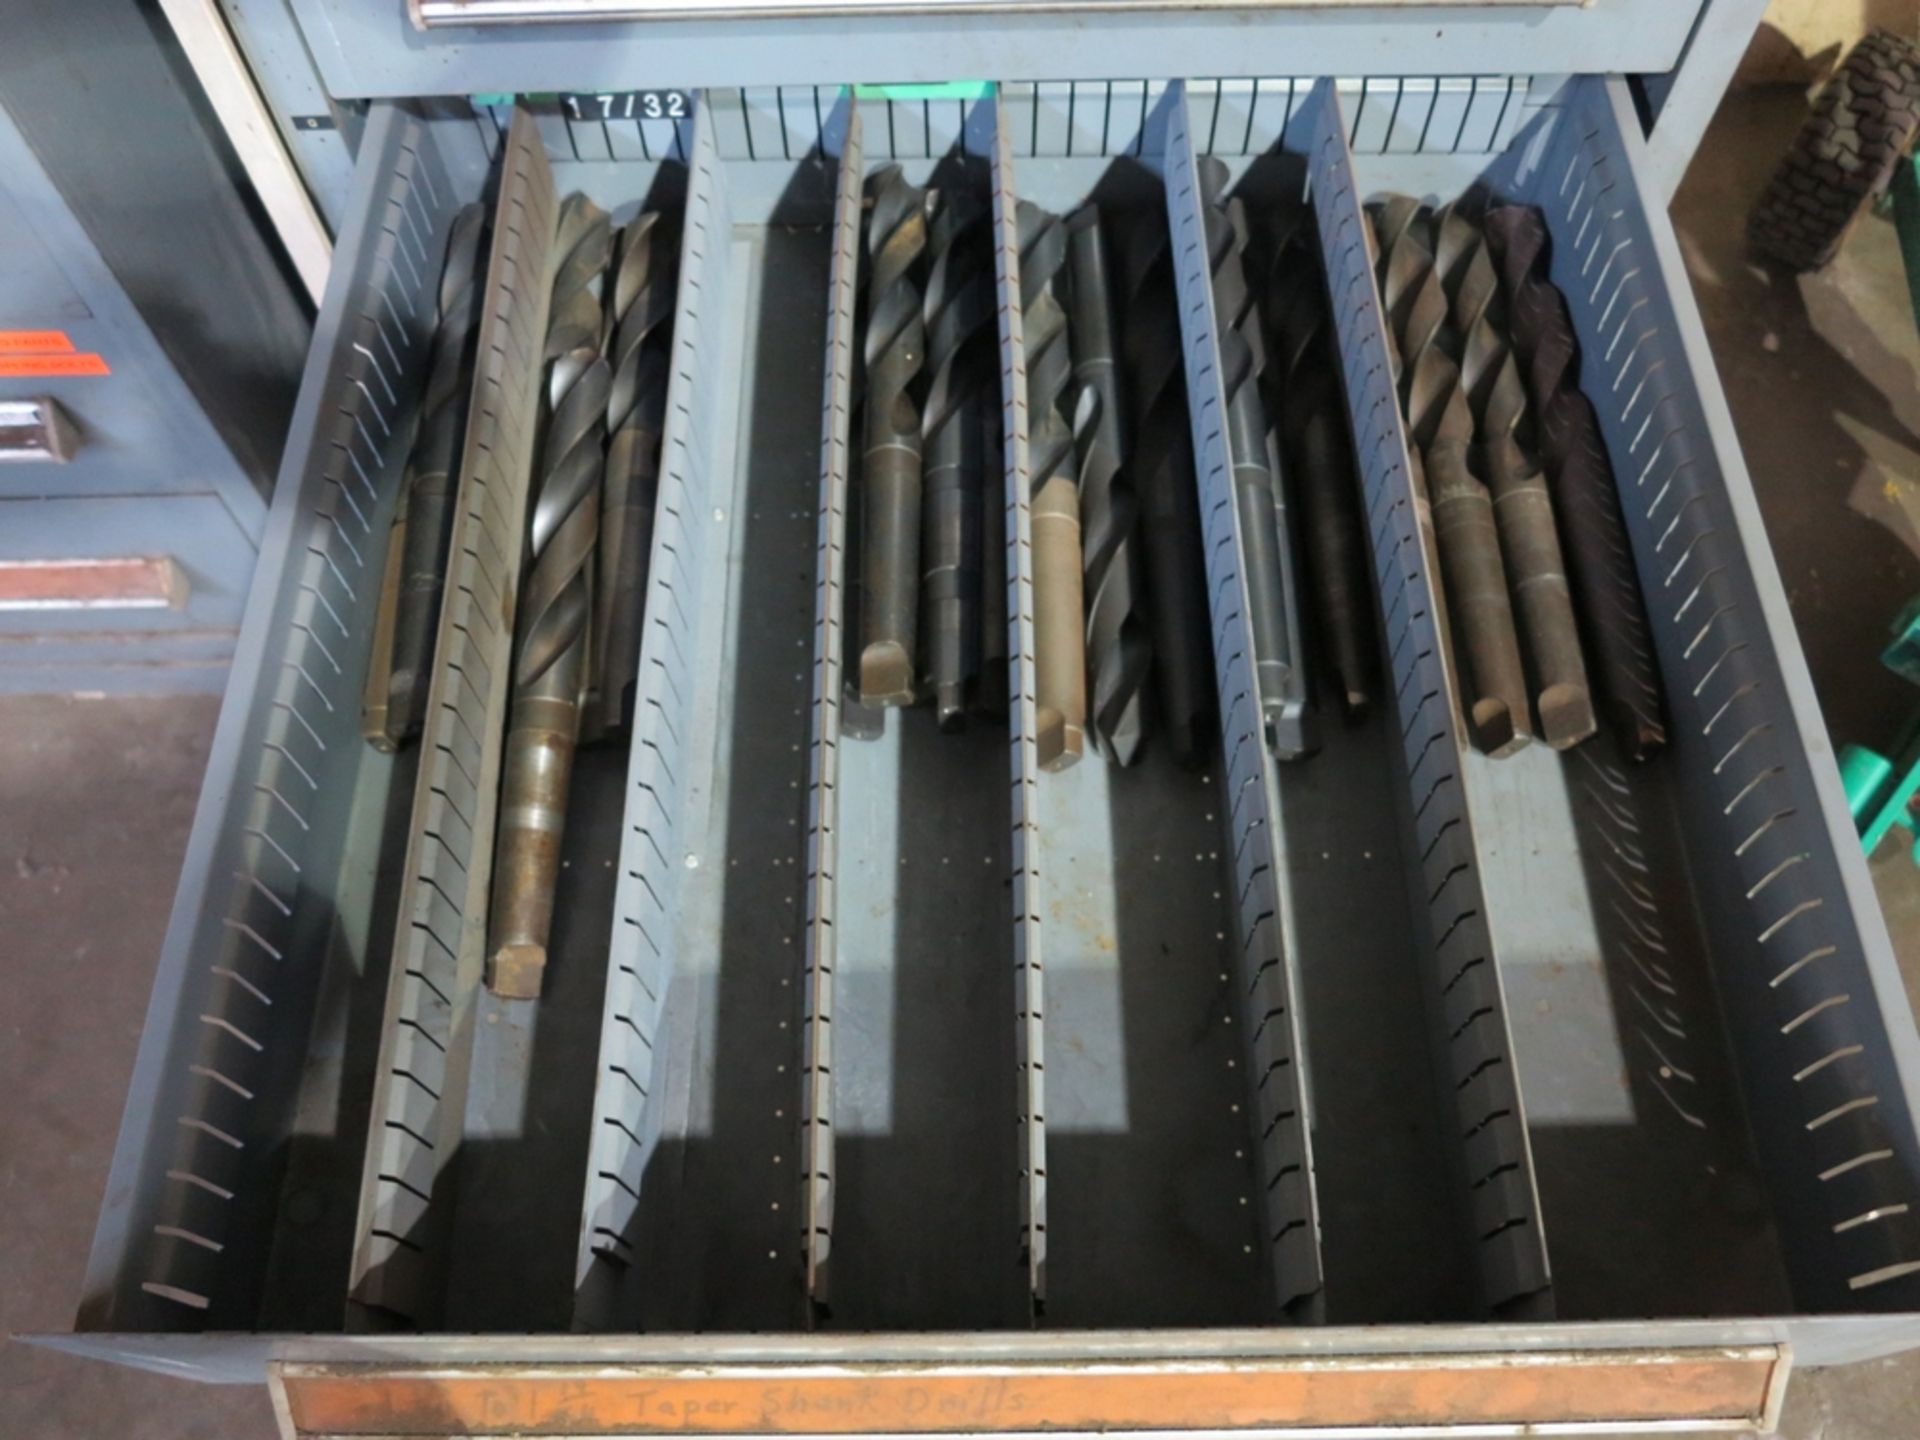 STANLEY VIDMAR 9-DRAWER TOOL CABINET W/ CONTENTS OF TAPER DRILLS AND SLEEVES - Image 8 of 10